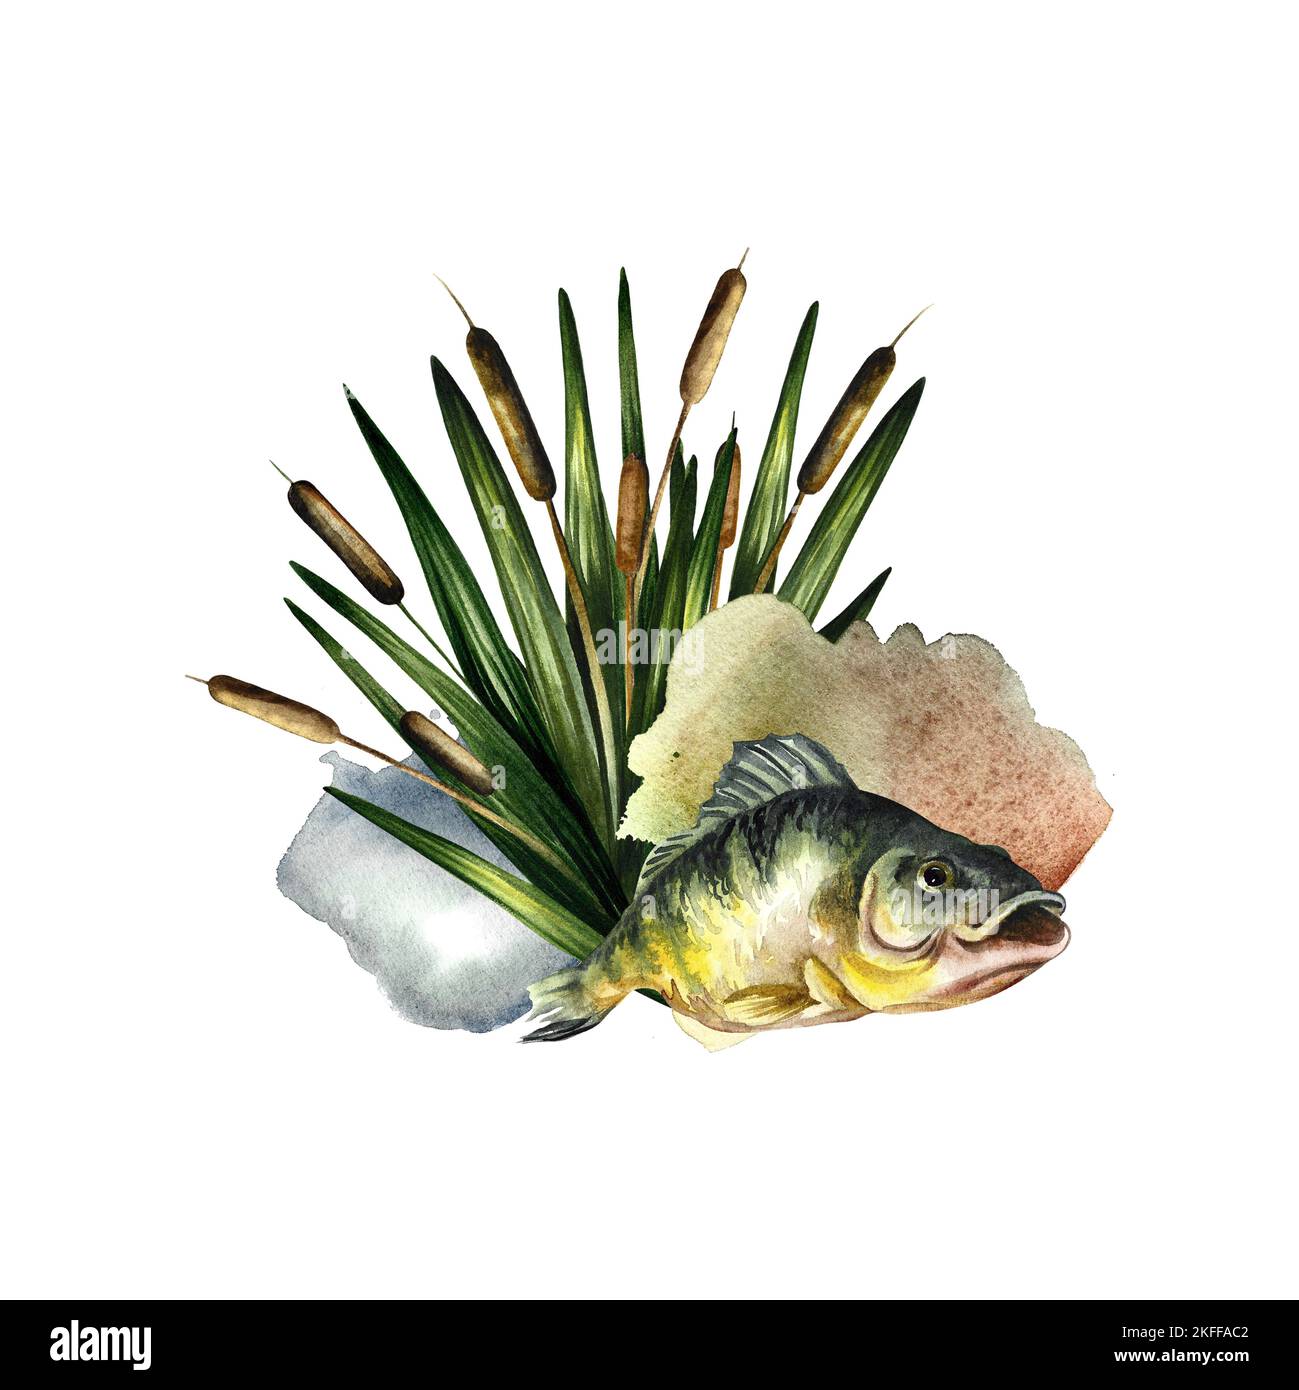 Composition with fish. Watercolor illustration. For fishing. For design, packaging, window stickers and banners, etc. Stock Photo